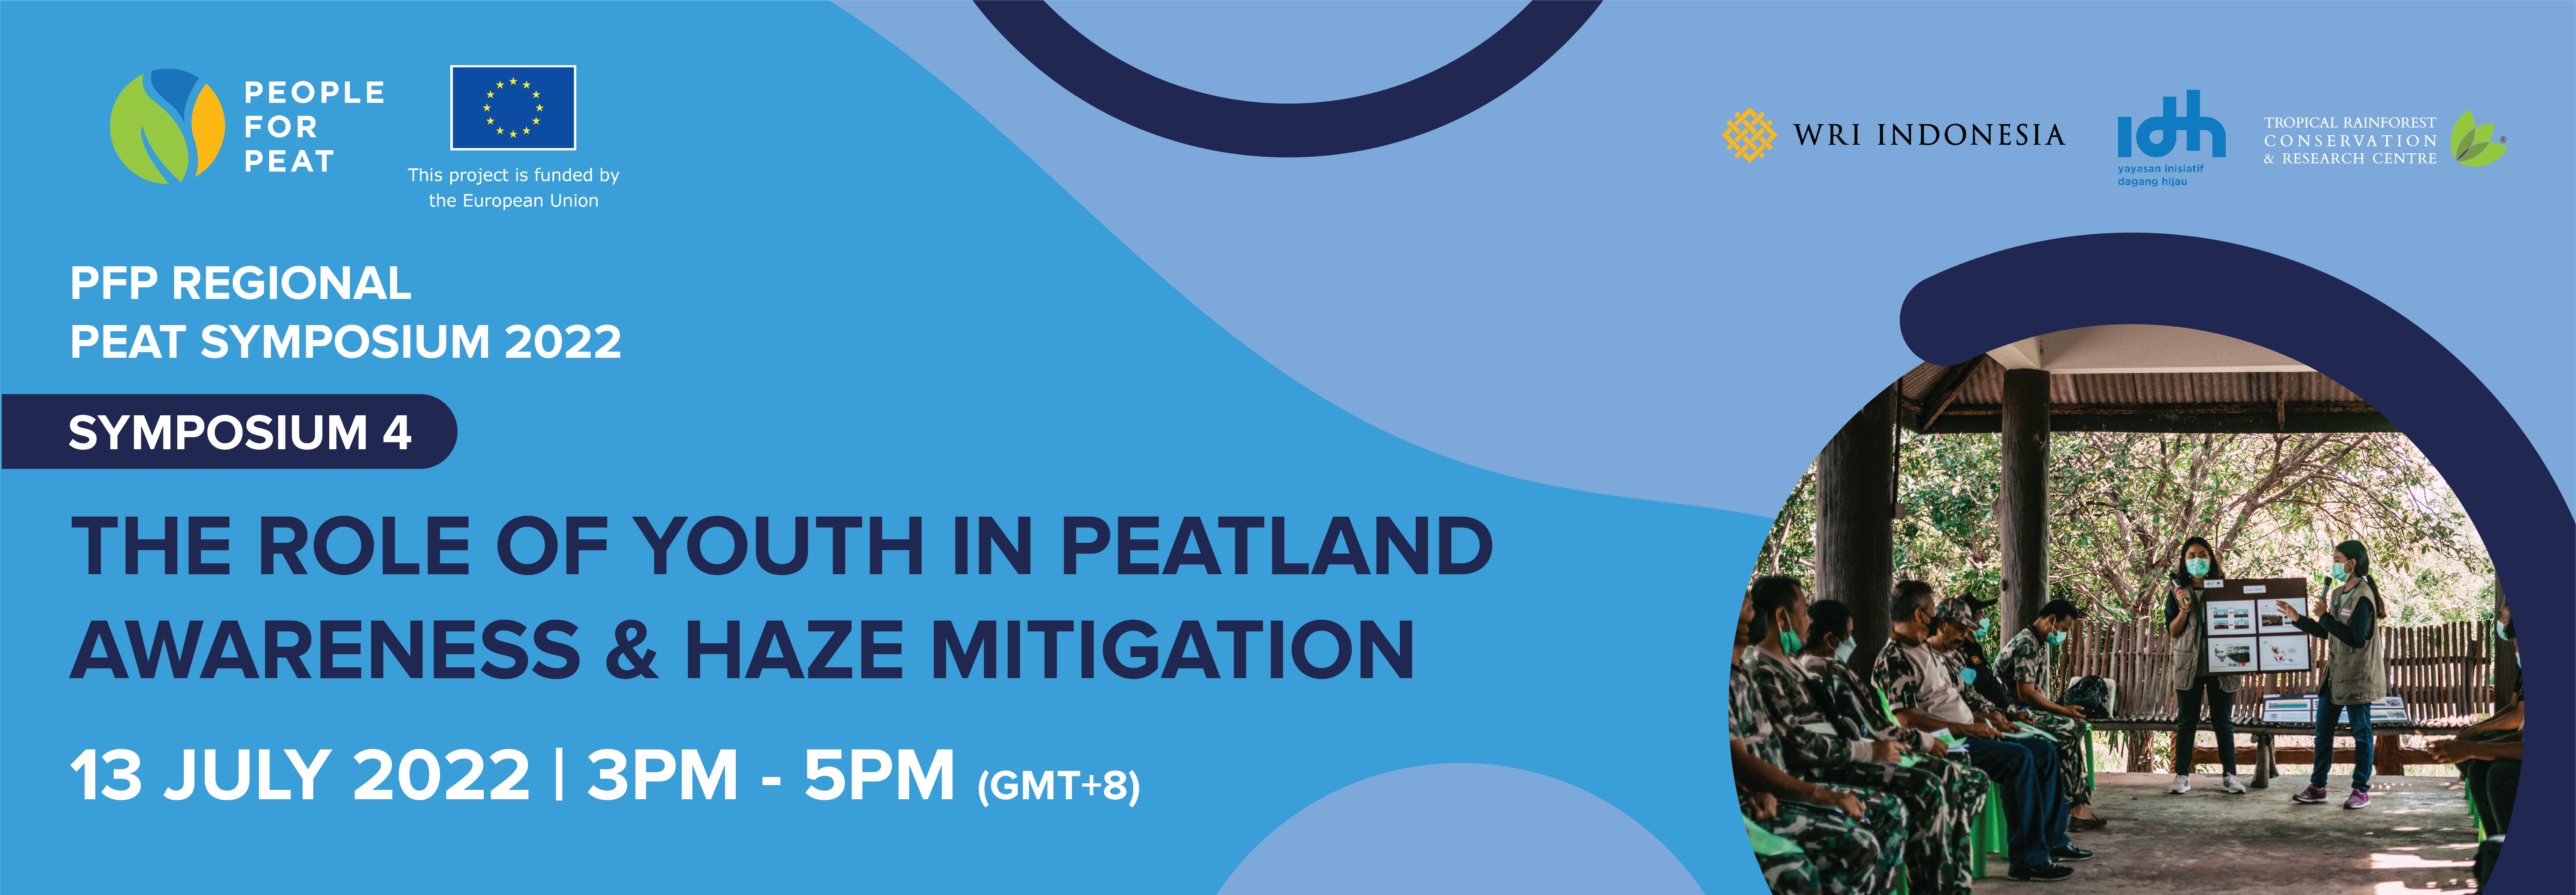 Regional Peat Symposium 2022 Series 4 : The Role of Youth in Peatland Awareness & Haze Mitigation